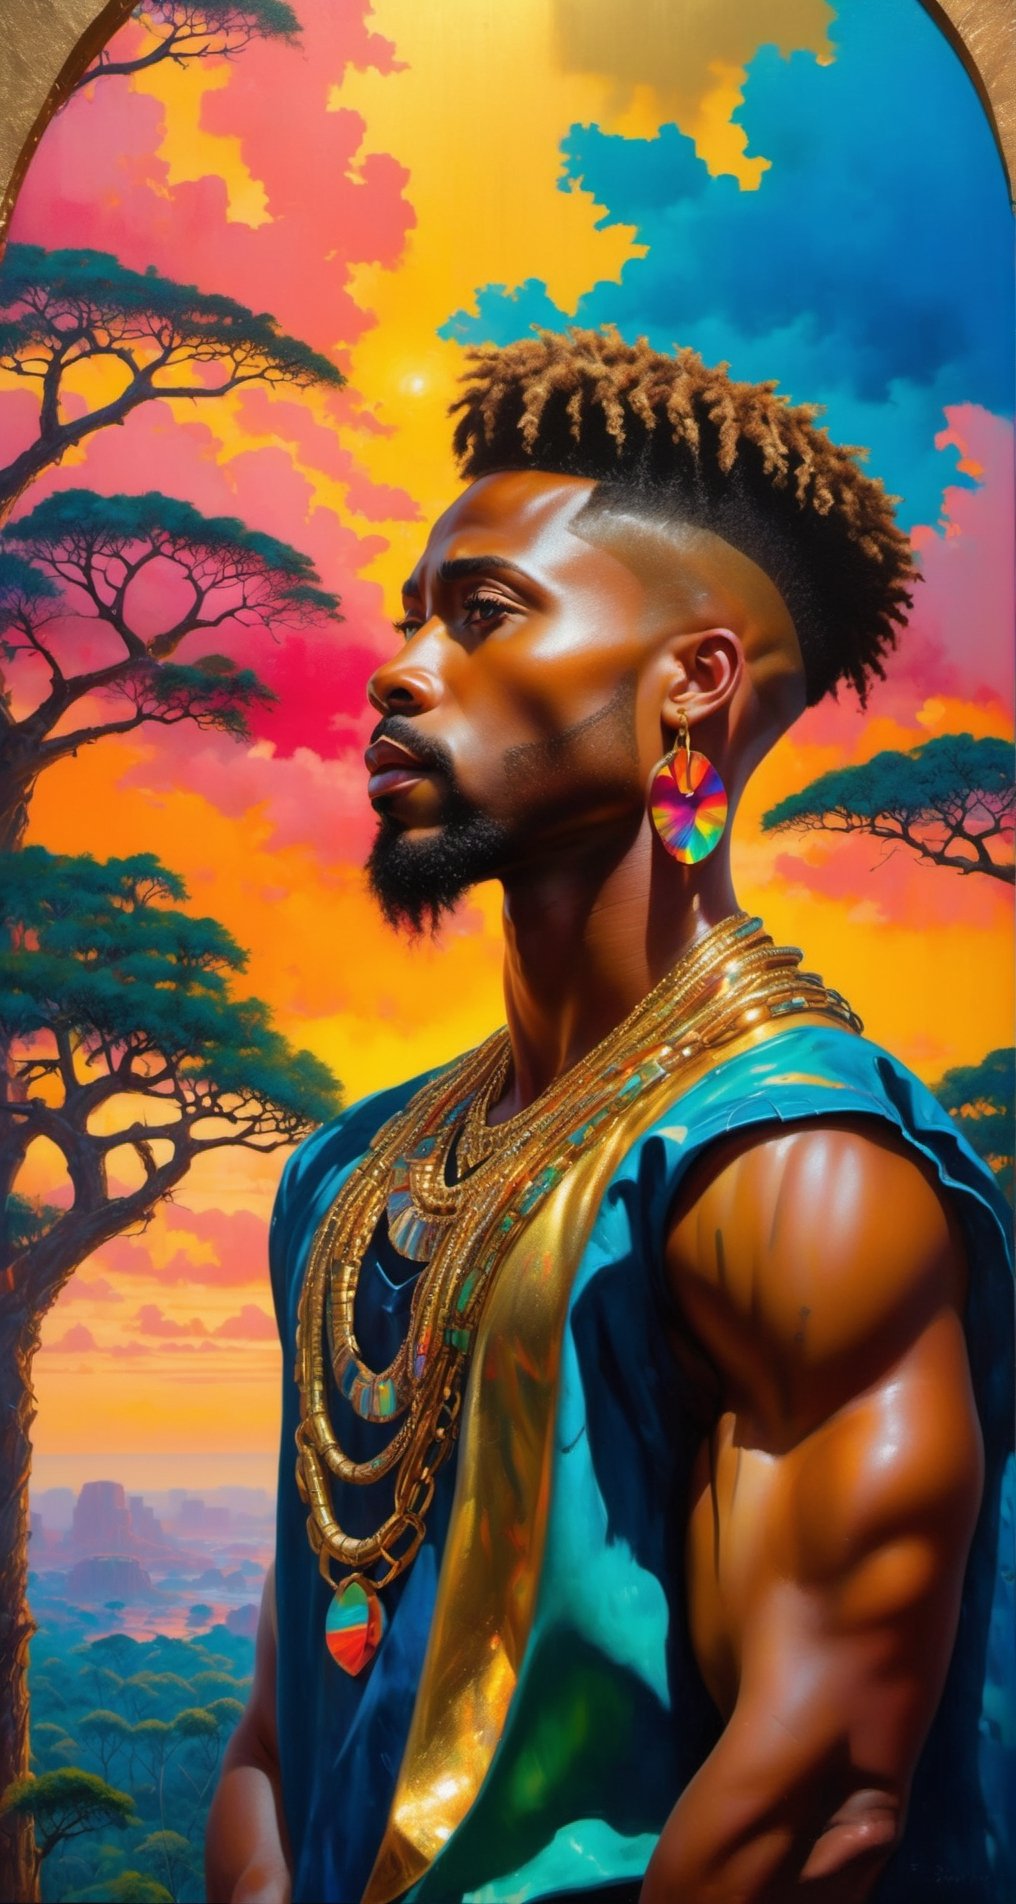 Please create a masterpiece,  (((stunningly beautiful African American man))), perfect face,  short hair, light_brown_eyes, thick lips, epic love, very muscula;r build baobab tree, overlooking the jungle below, hyper-realistic oil painting,  vibrant colors, traditional african mans garment, gold chains and bracelets,   biopunk,   dystopic,  golden light,  perfect composition, colorful sky, dripping paint,  